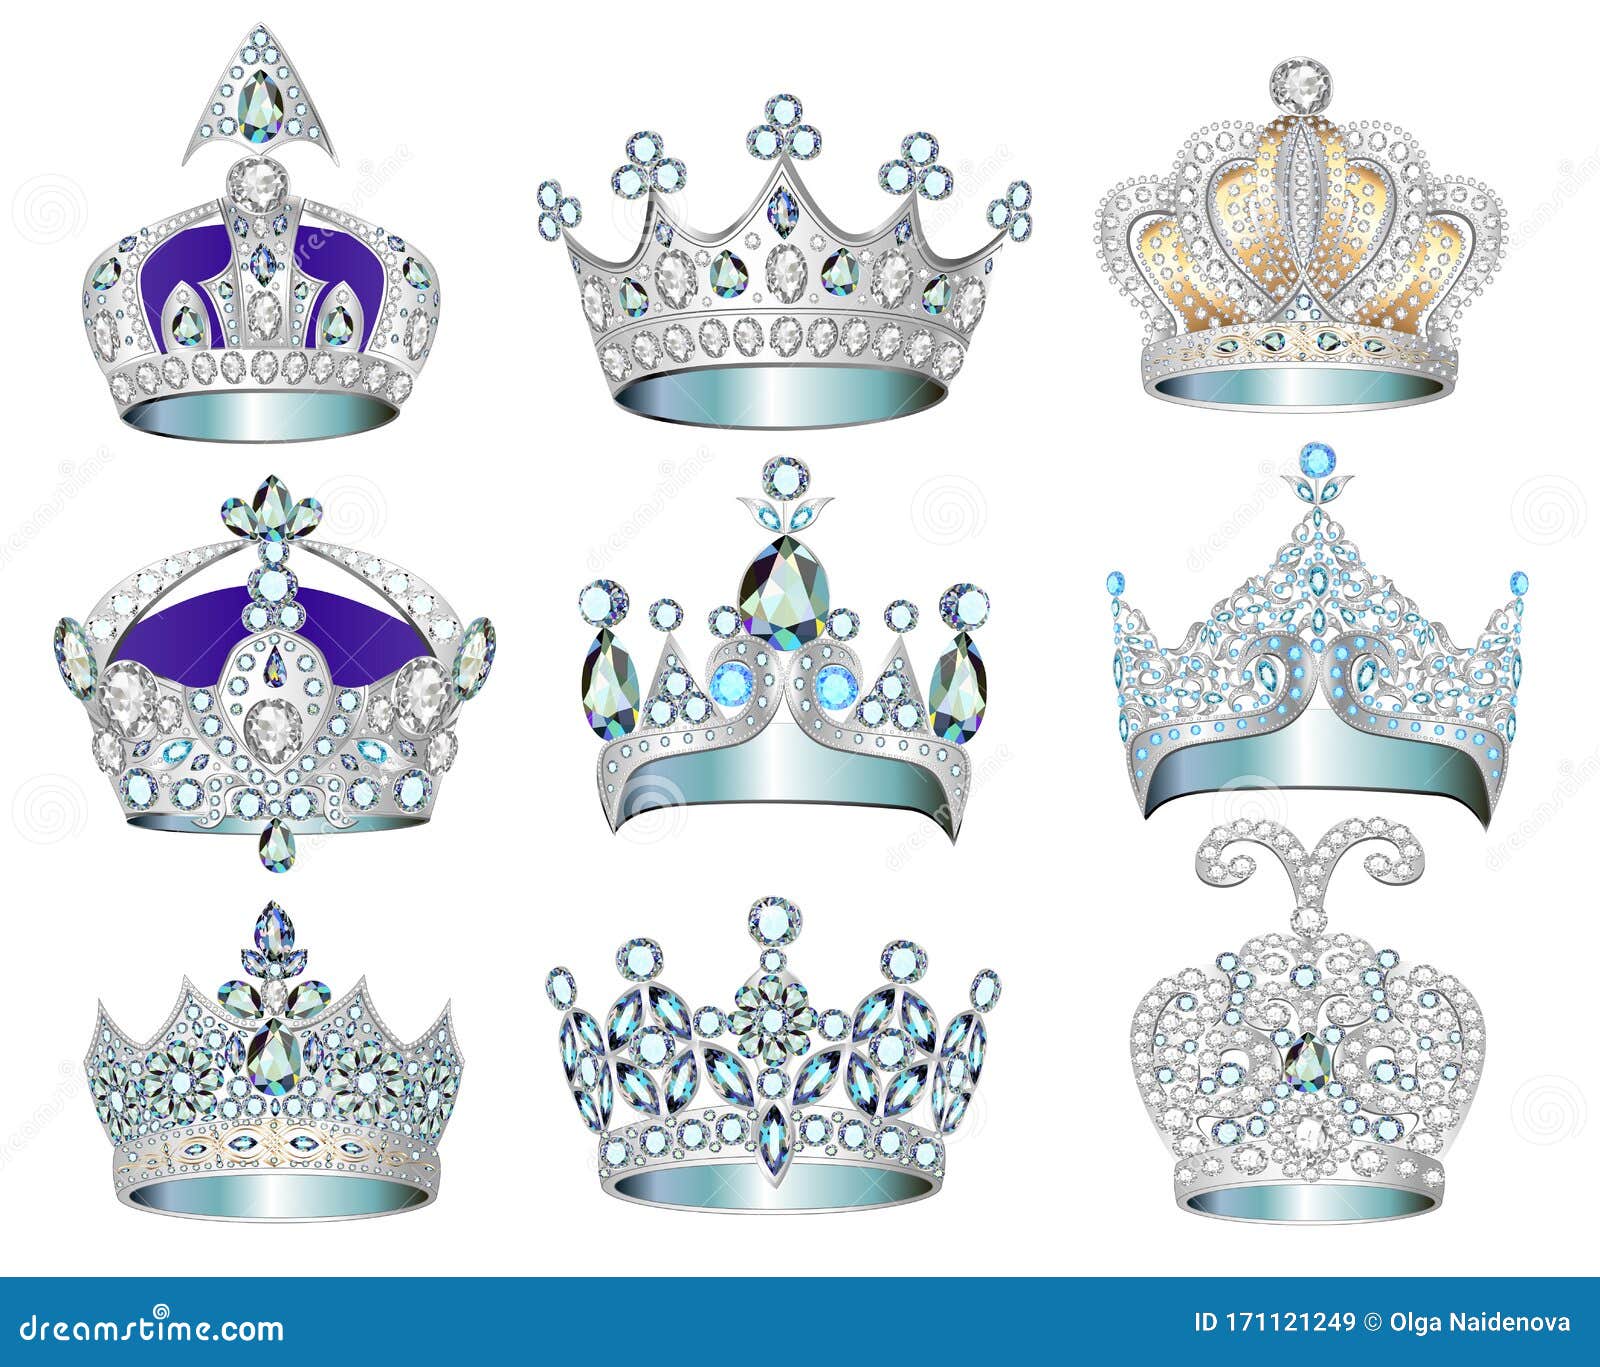 set of jewelry silver crowns with precious stones